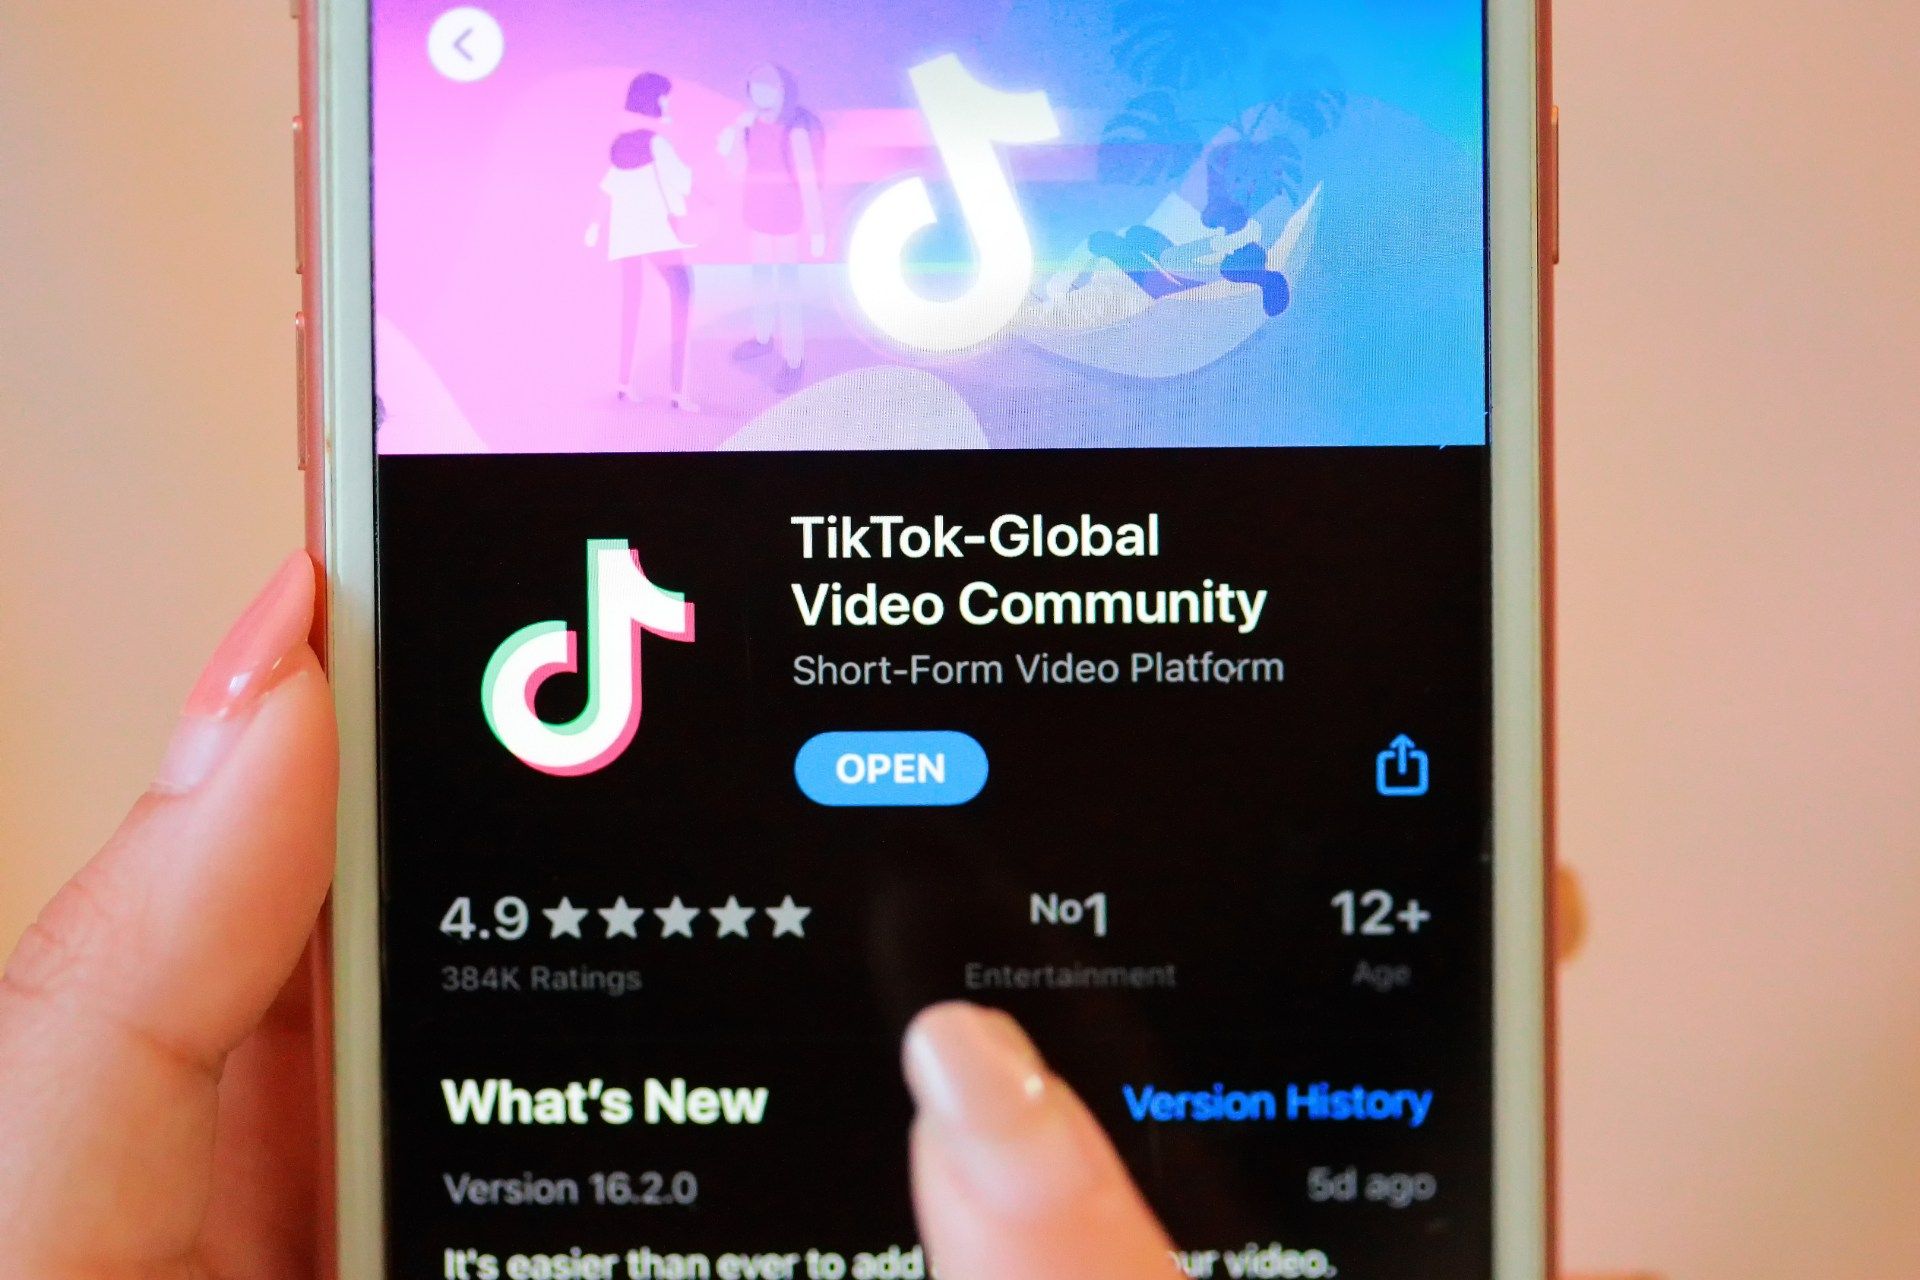 A person downloads the TikTok app from the App Store on a smartphone - TikTok users